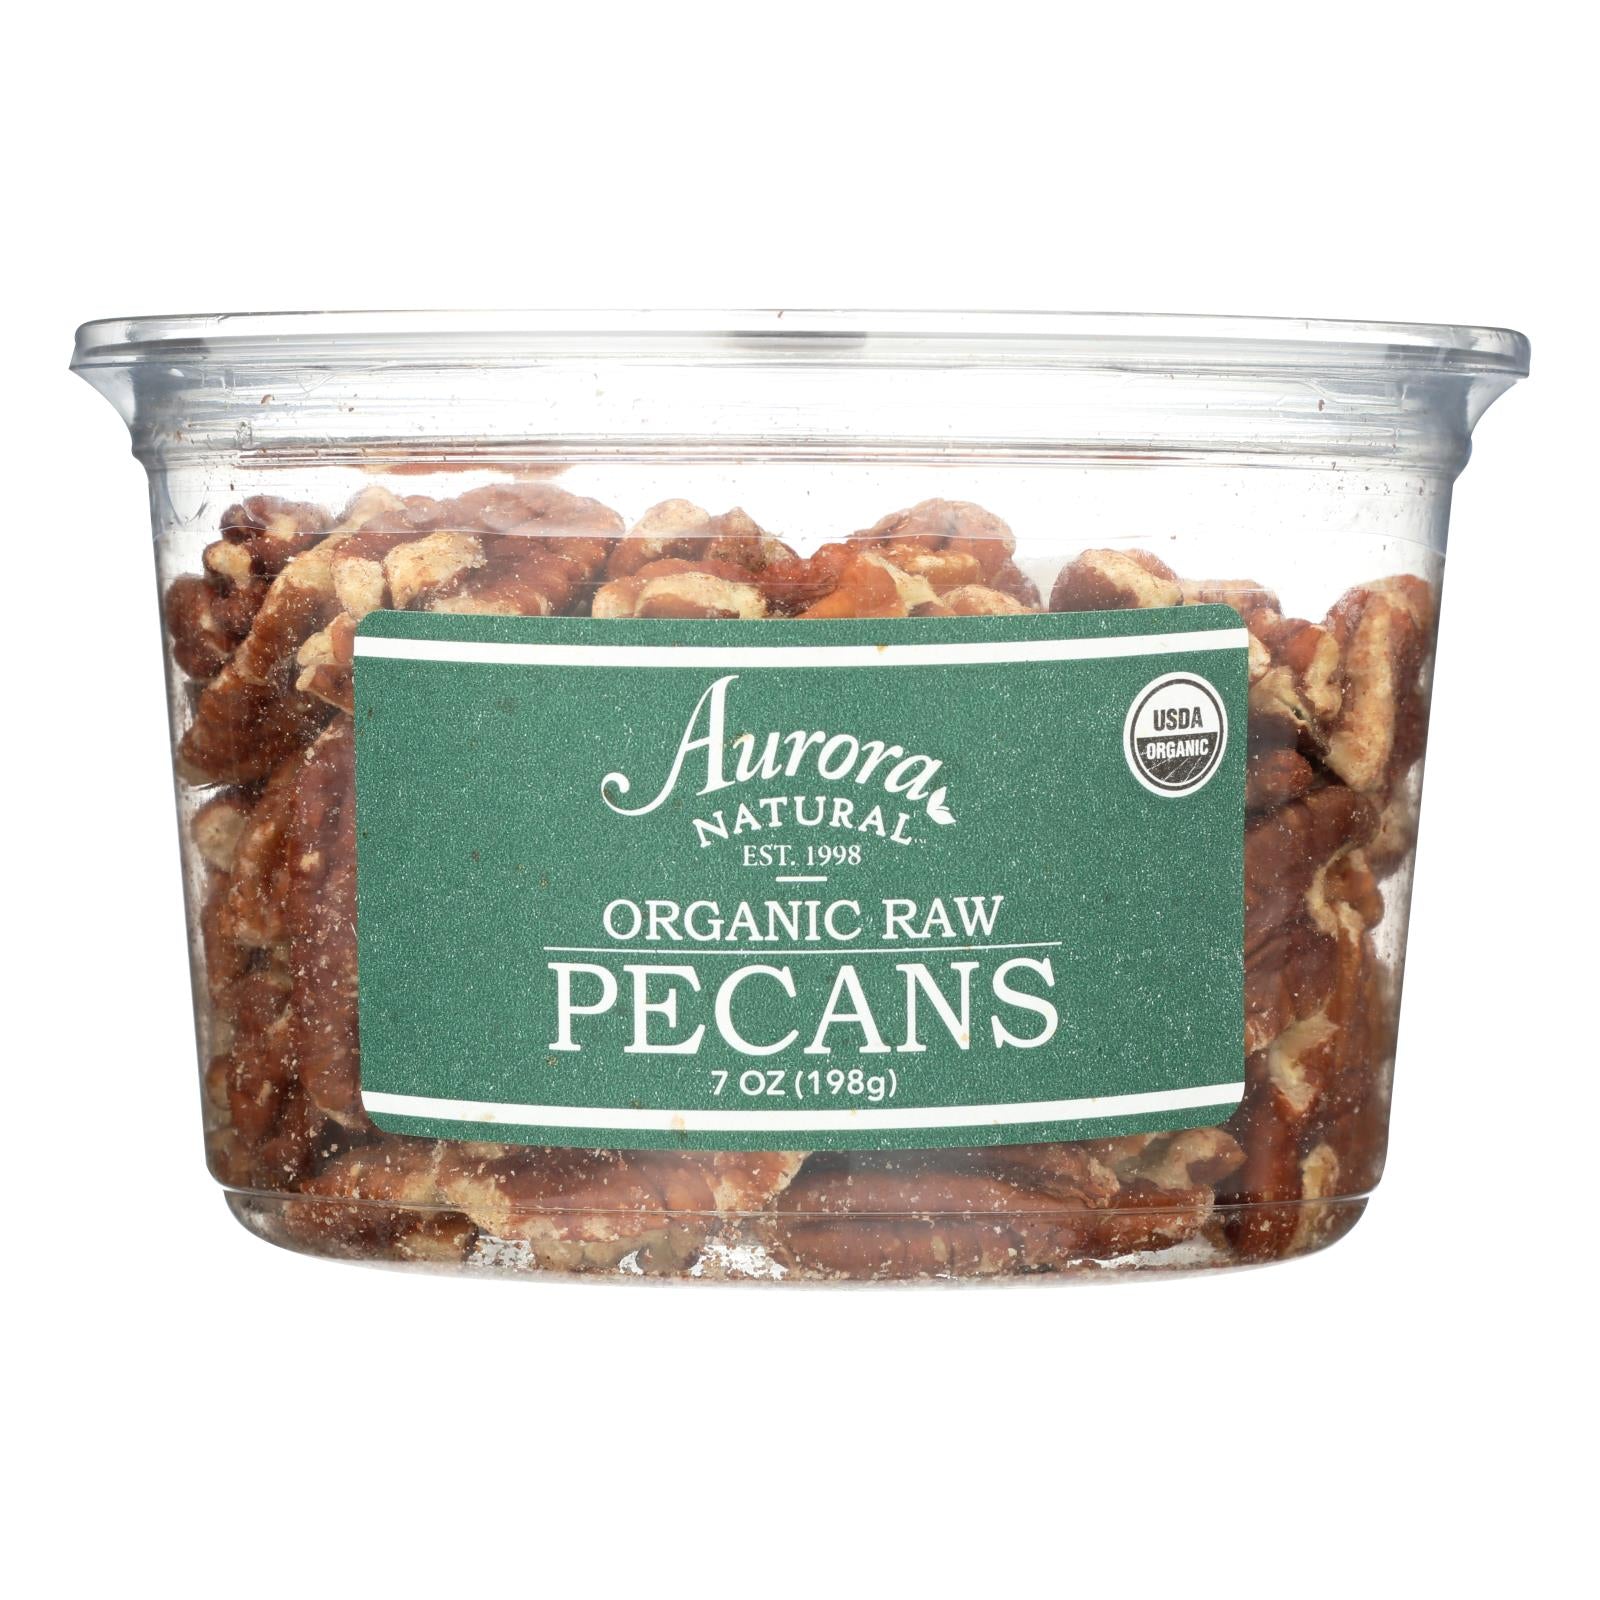 Aurora Natural Products, Aurora Natural Products - Organic Raw Pecans - Case of 12 - 7 oz. (Pack of 12)